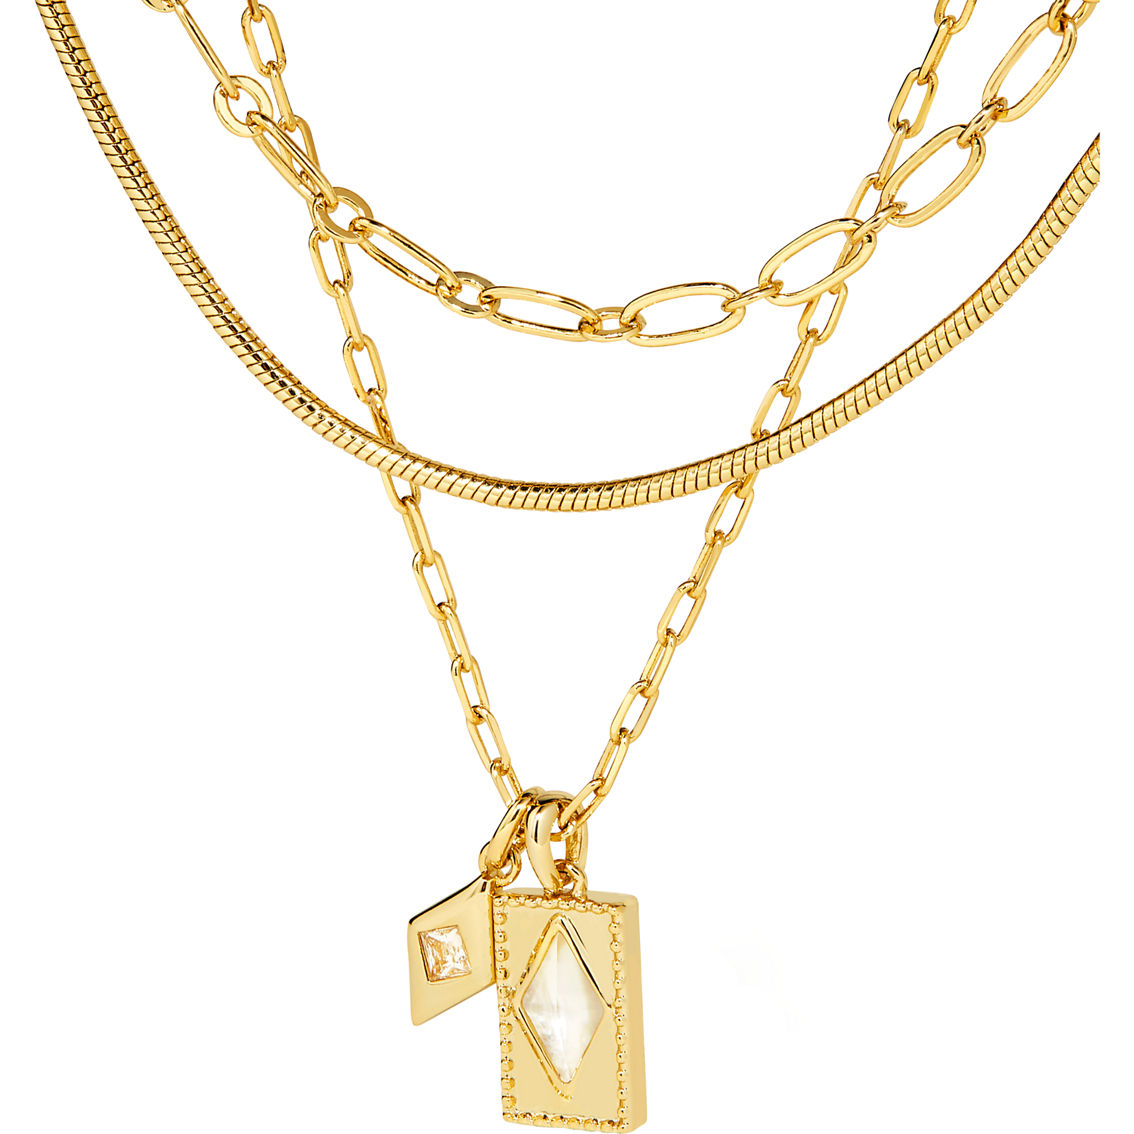 Kendra Scott Kinsley Multistrand Necklace in Gold Ivory Mother Of Pearl - Image 2 of 3